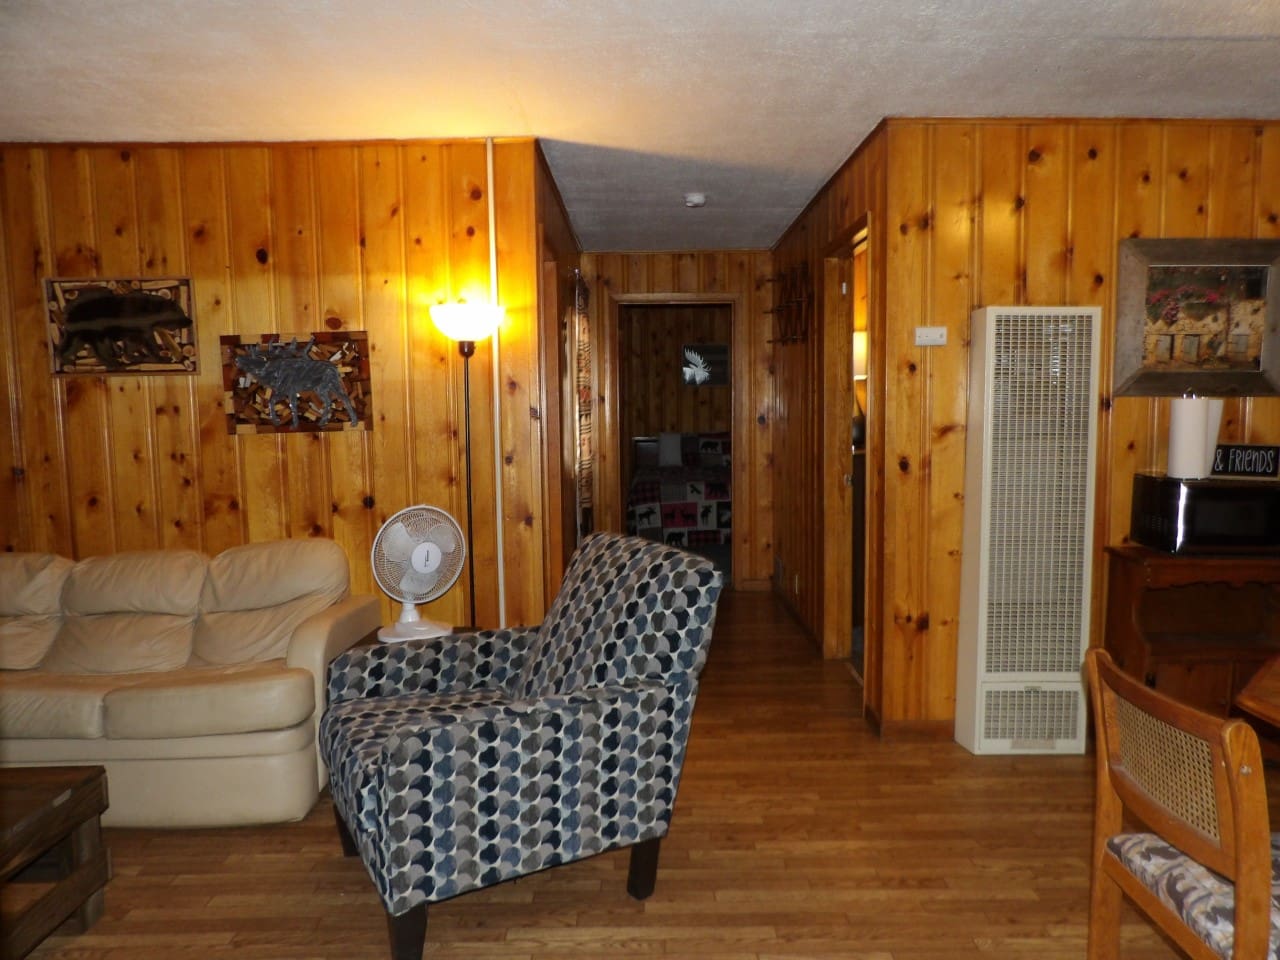 A living room with wood paneled walls and hardwood floors.